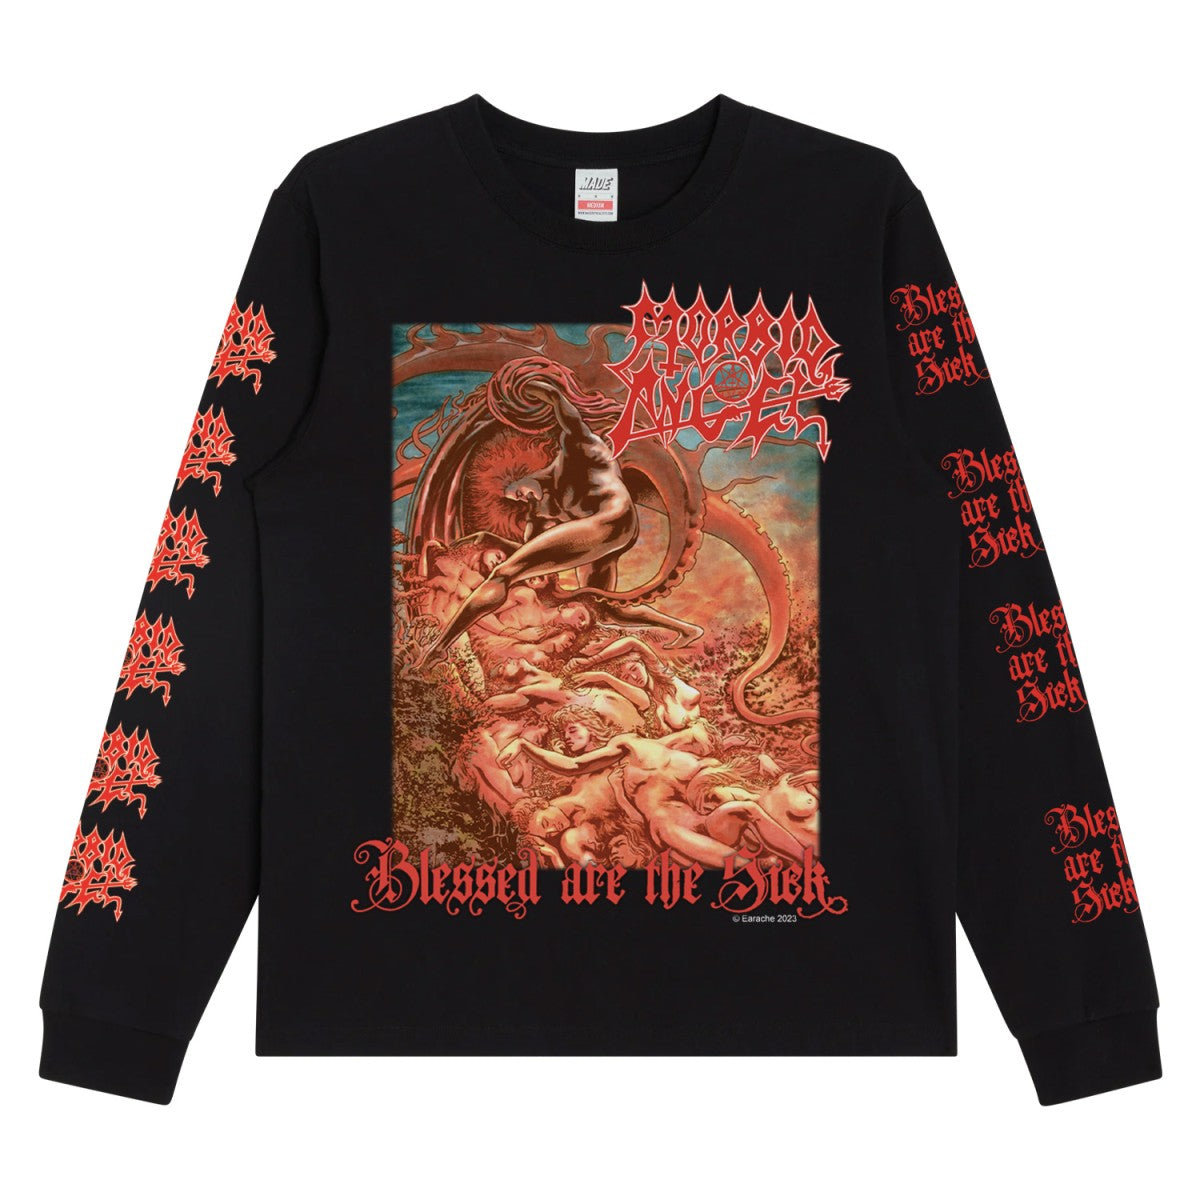 Morbid Angel "Blessed Are The Sick" Long Sleeve T shirt